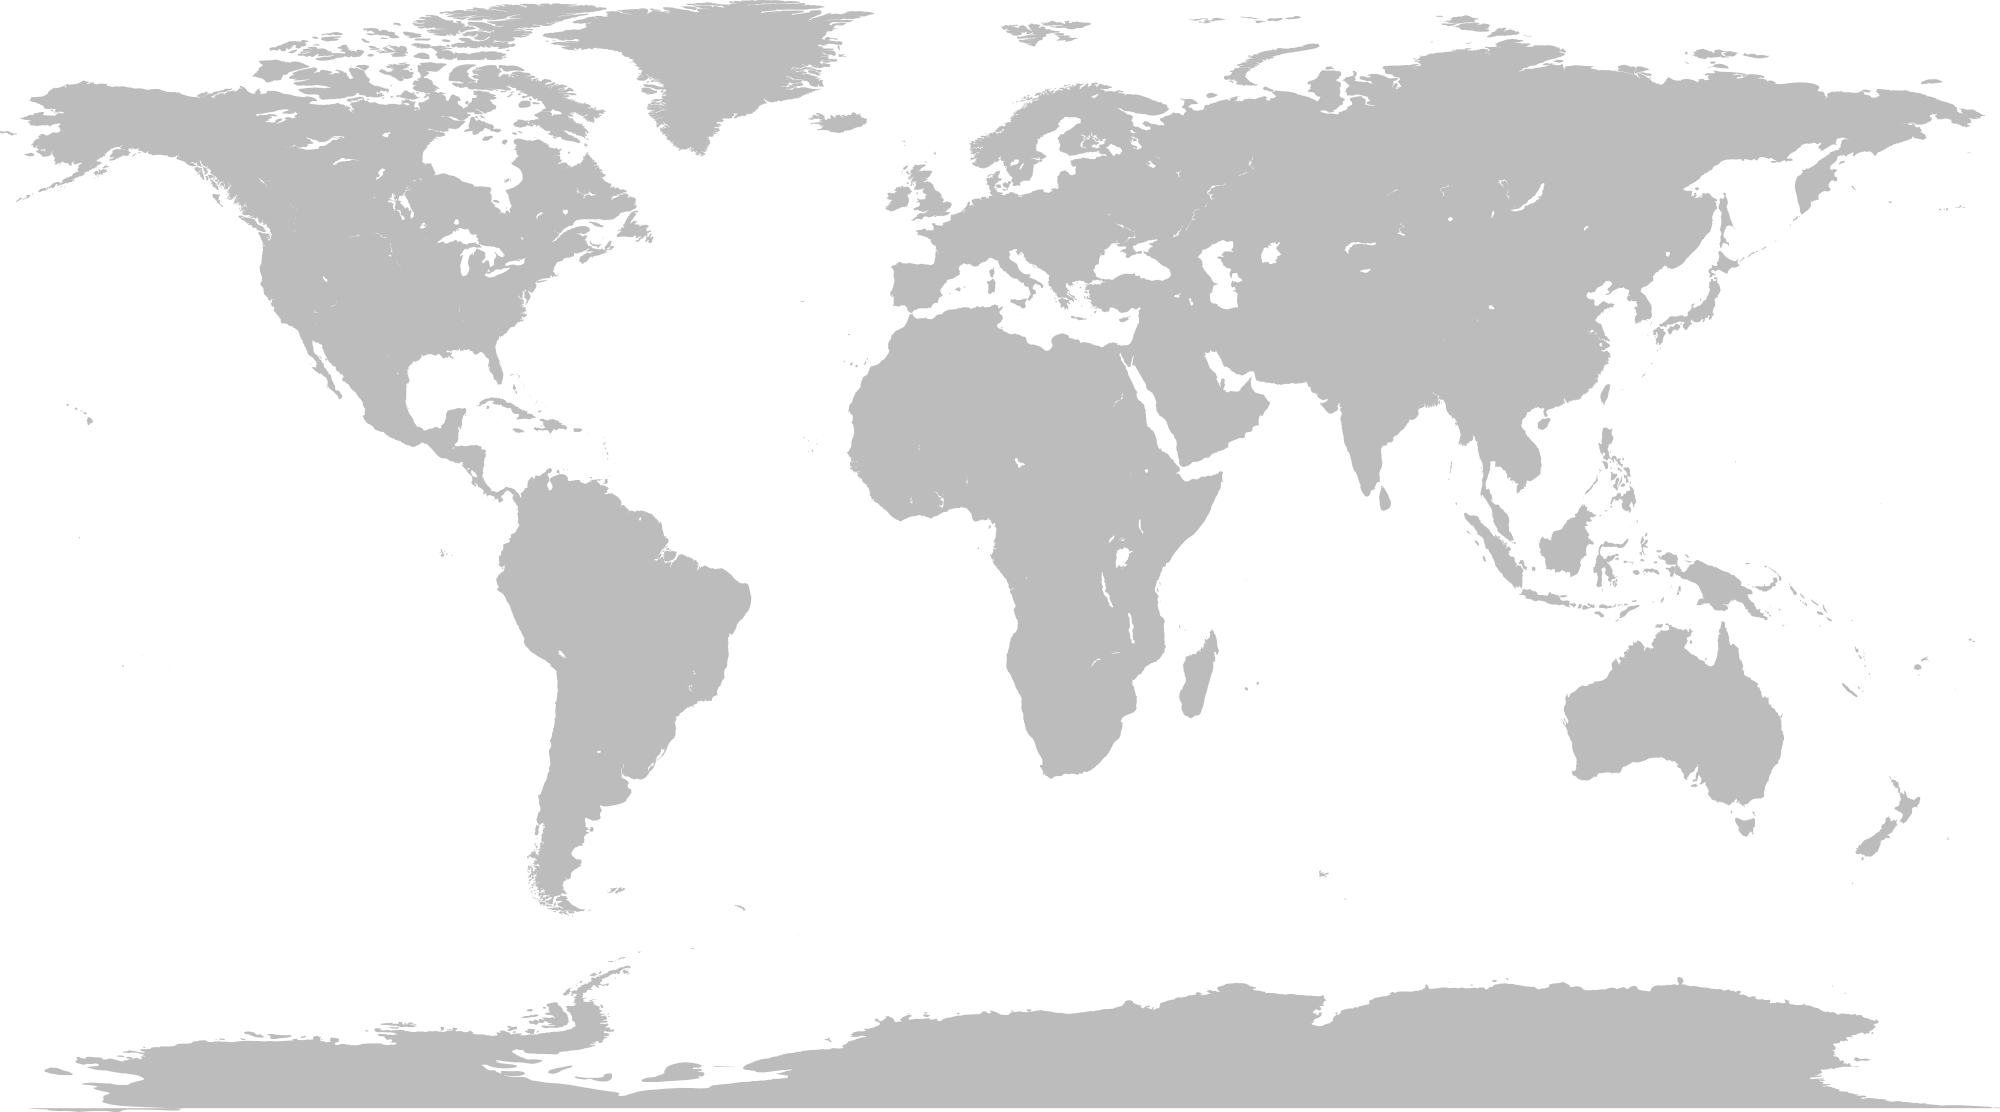 File:World map blank gmt.png